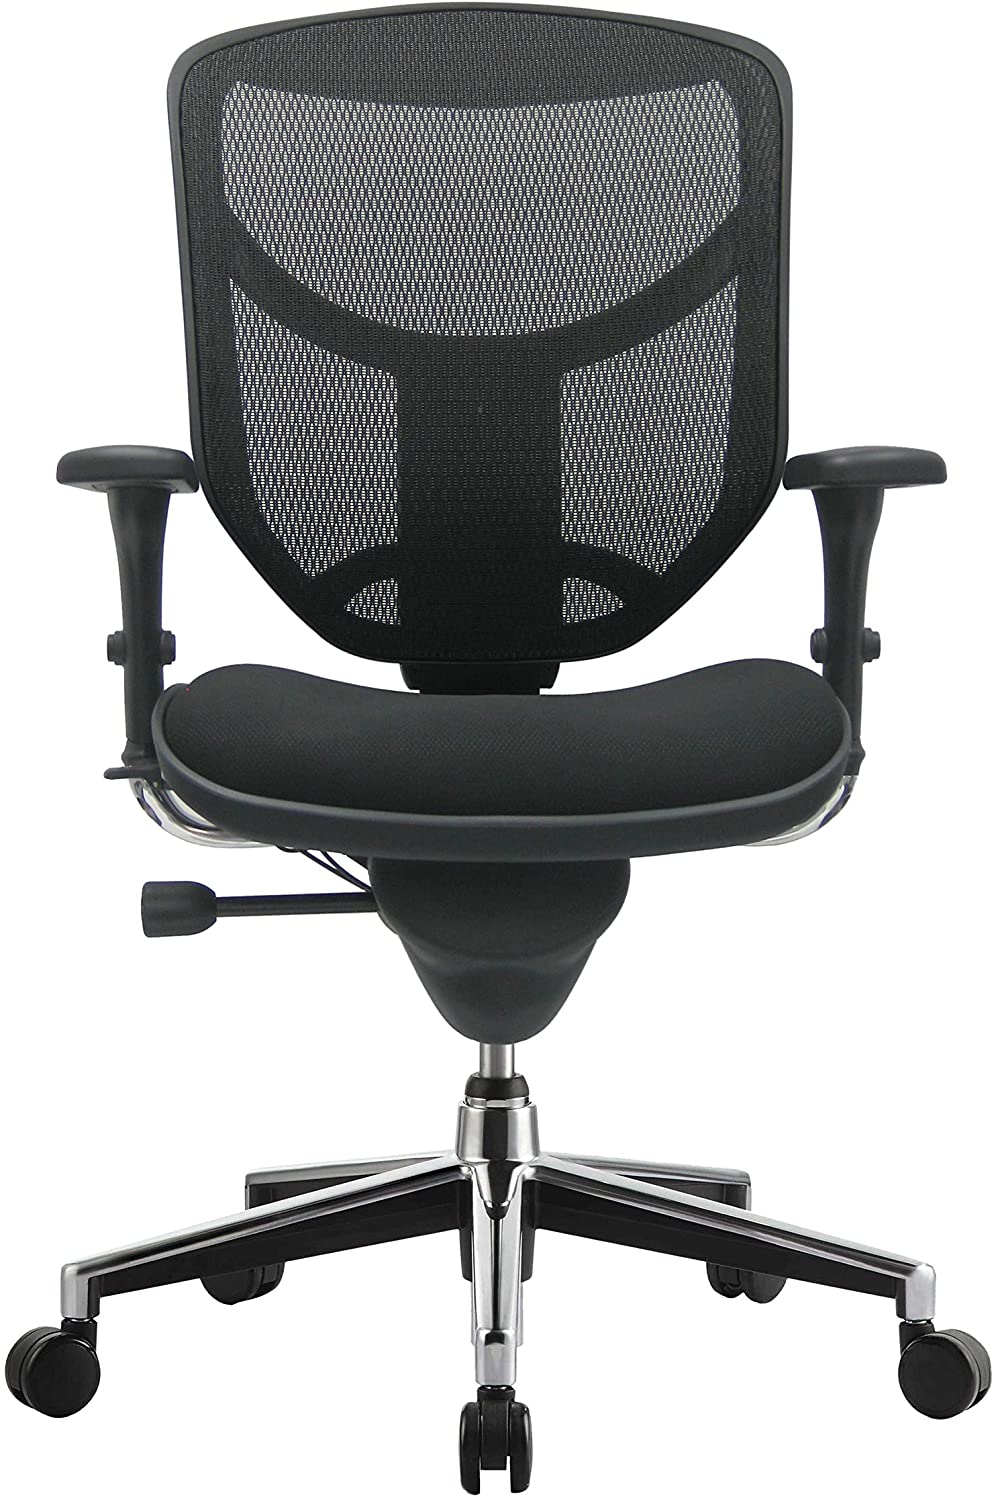 LOTUS EXECUTIVE MESH BACK CHAIR - INCLUDES BOXED SHIPPING IN SYD METRO